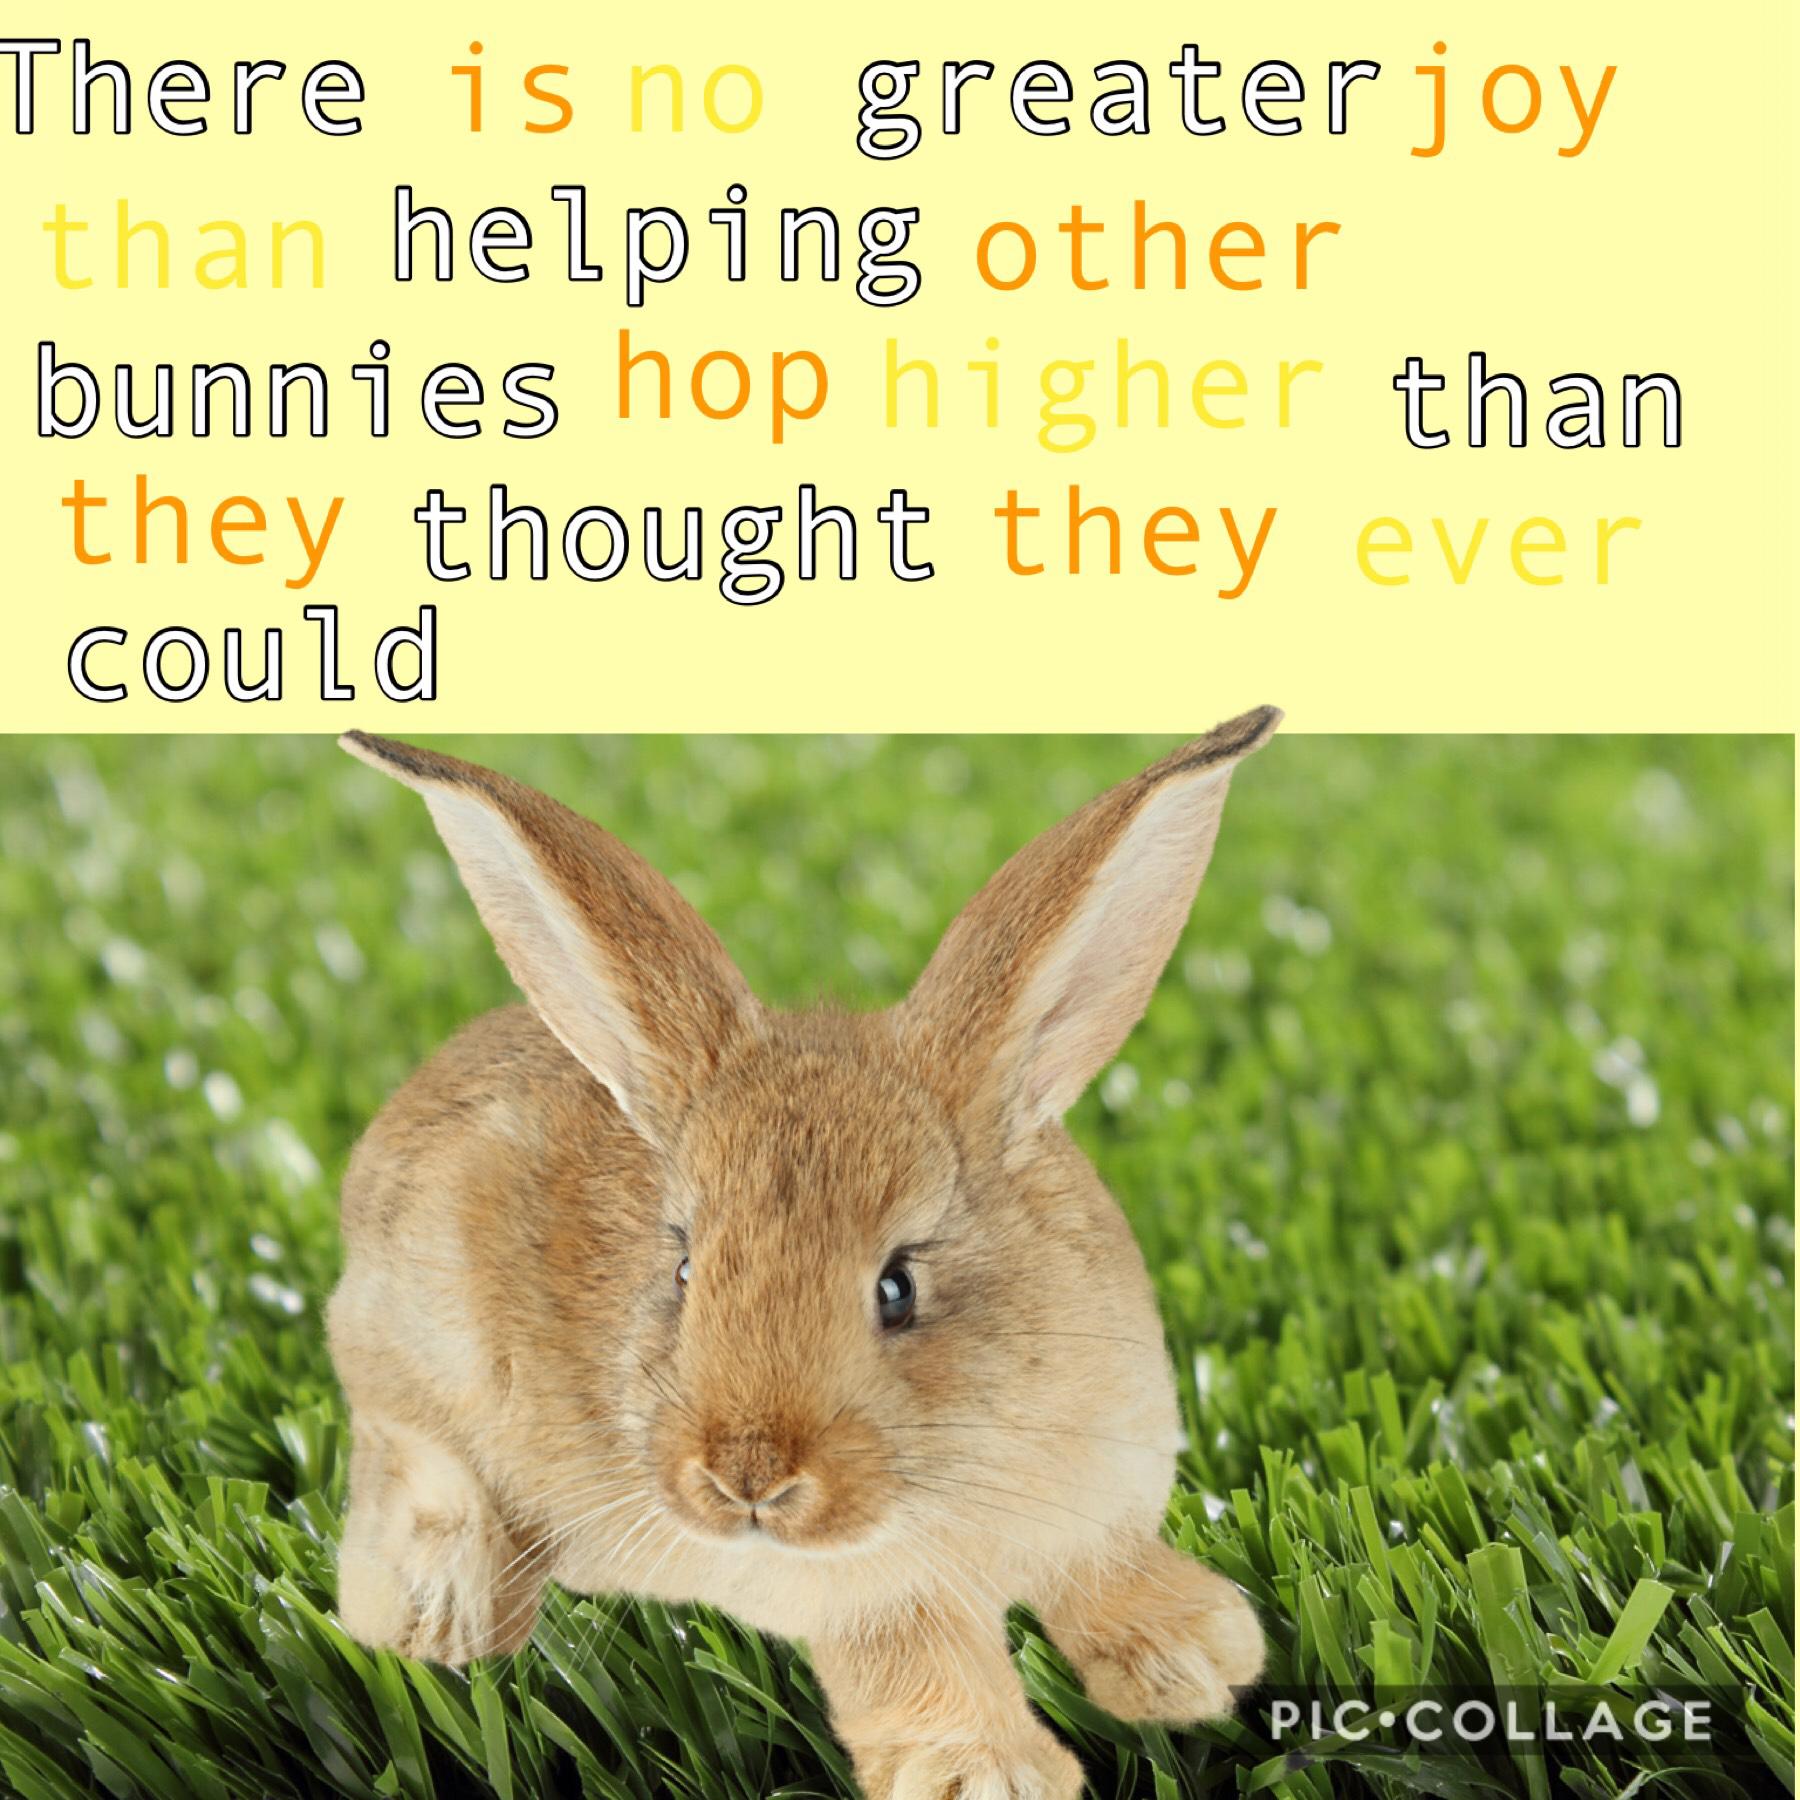 There is no greater joy than helping other bunnies hop higher than they thought they ever could!🐰